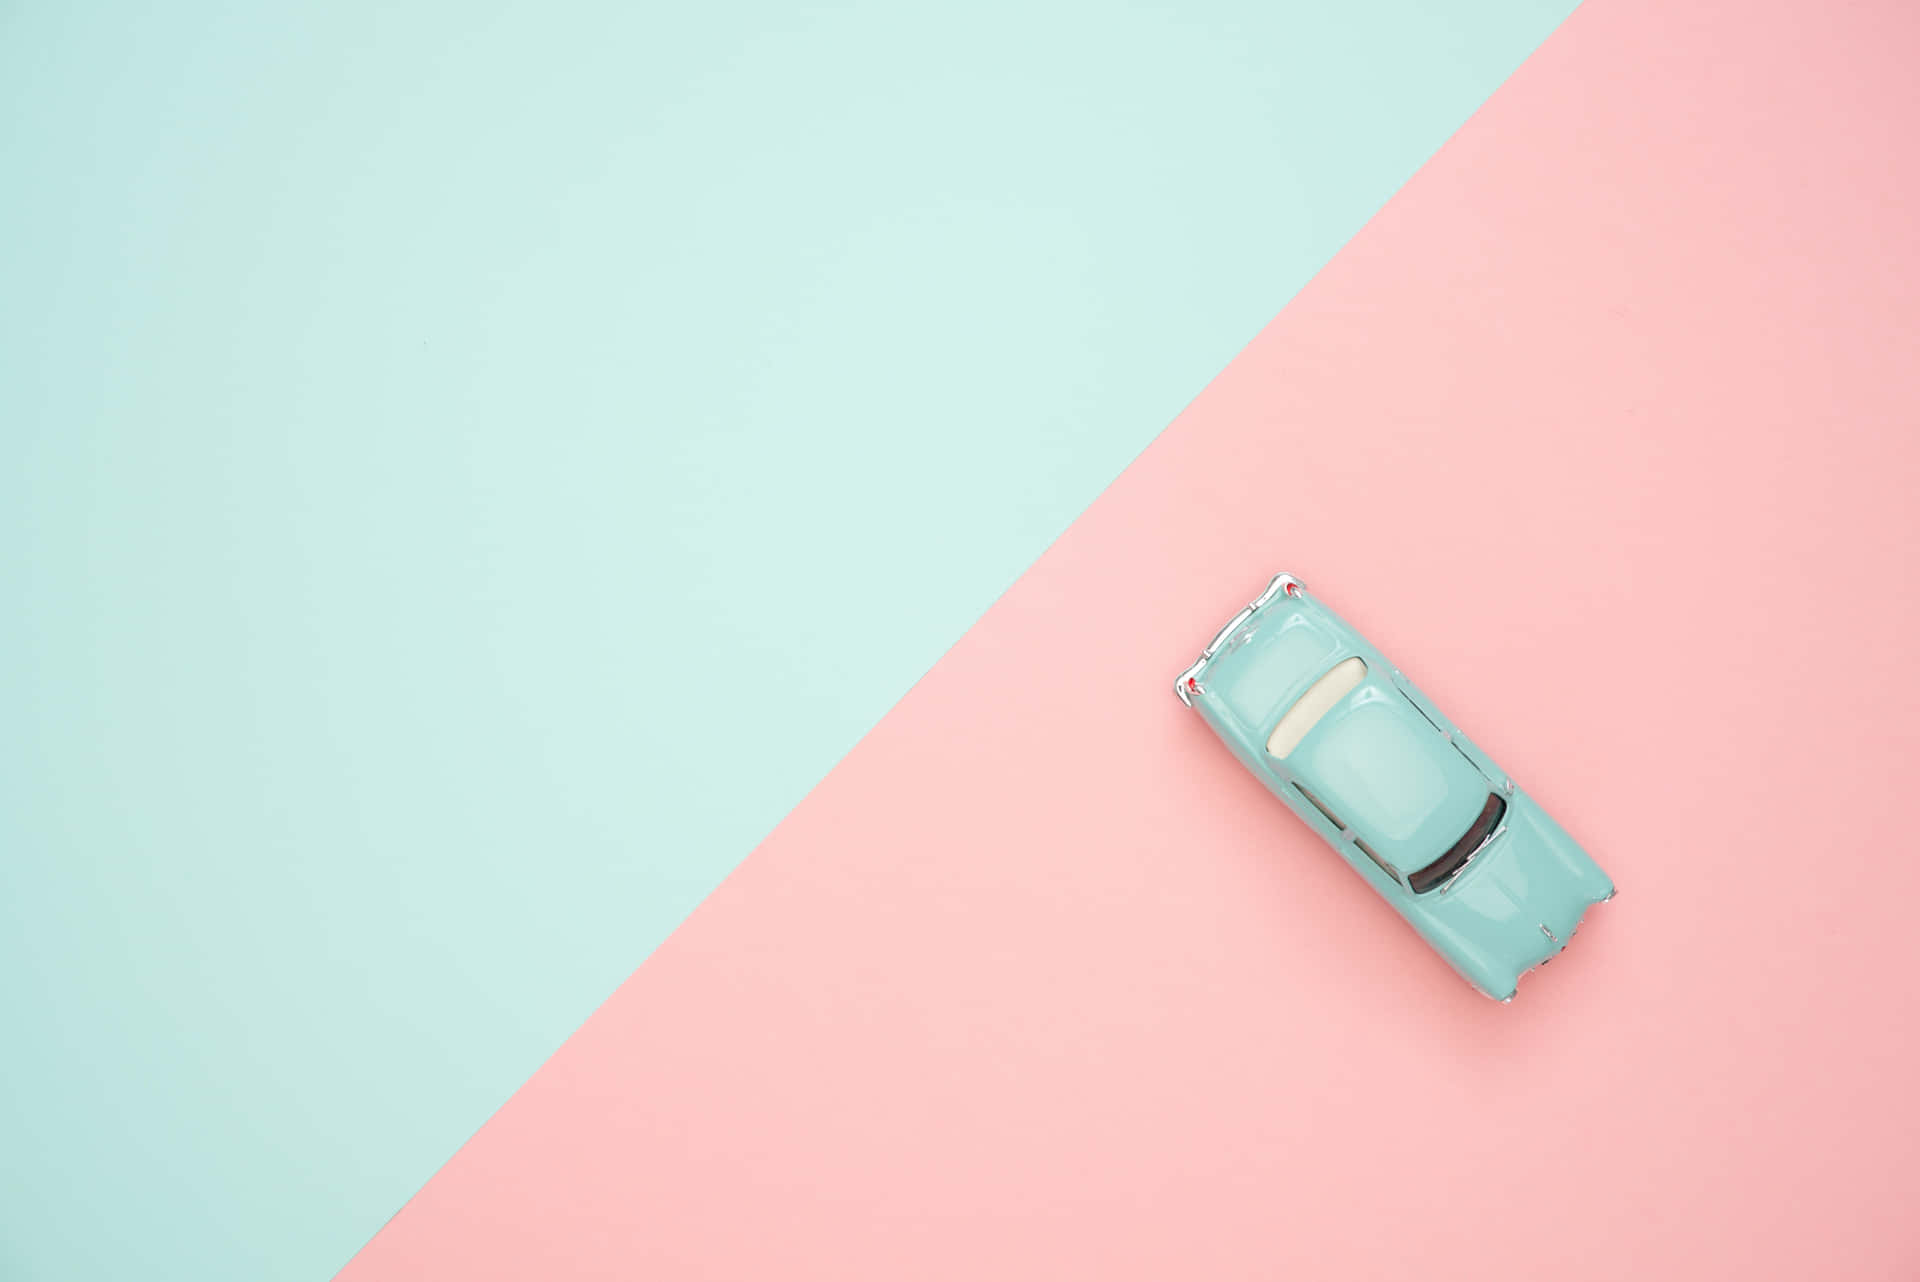 Toy Car On Pink And Blue Picture